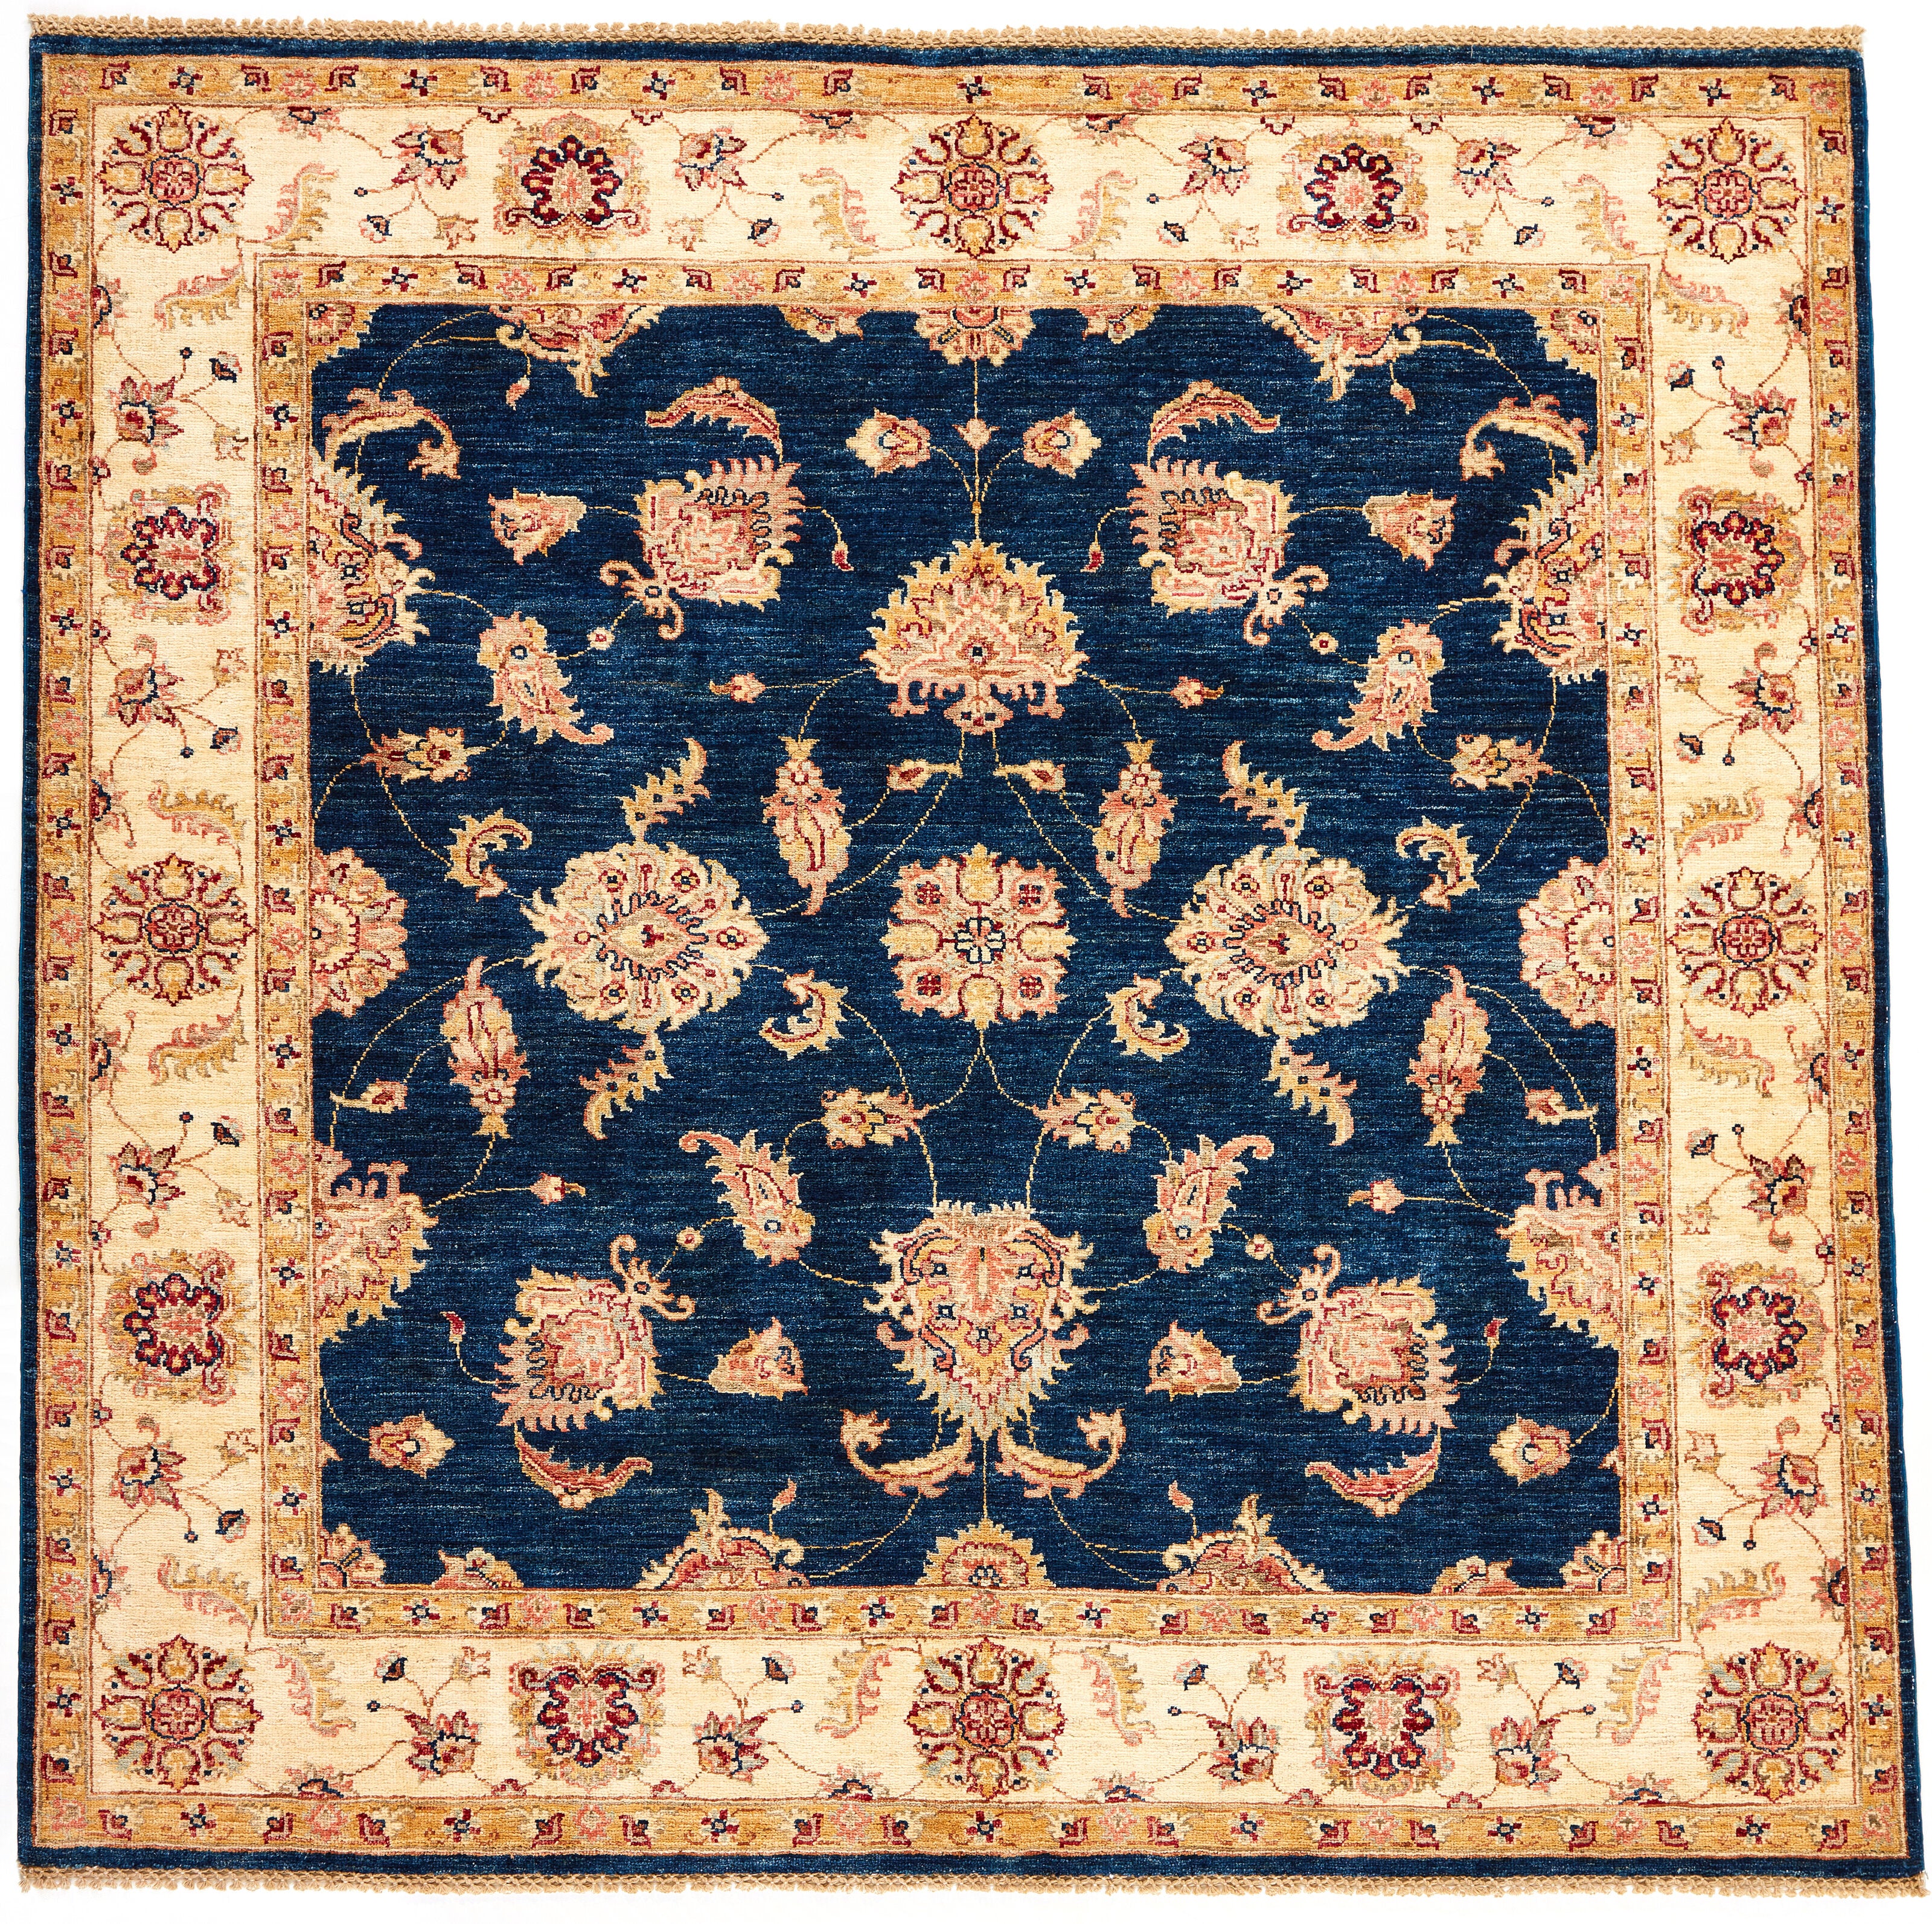 square oriental rug with blue and beige floral pattern